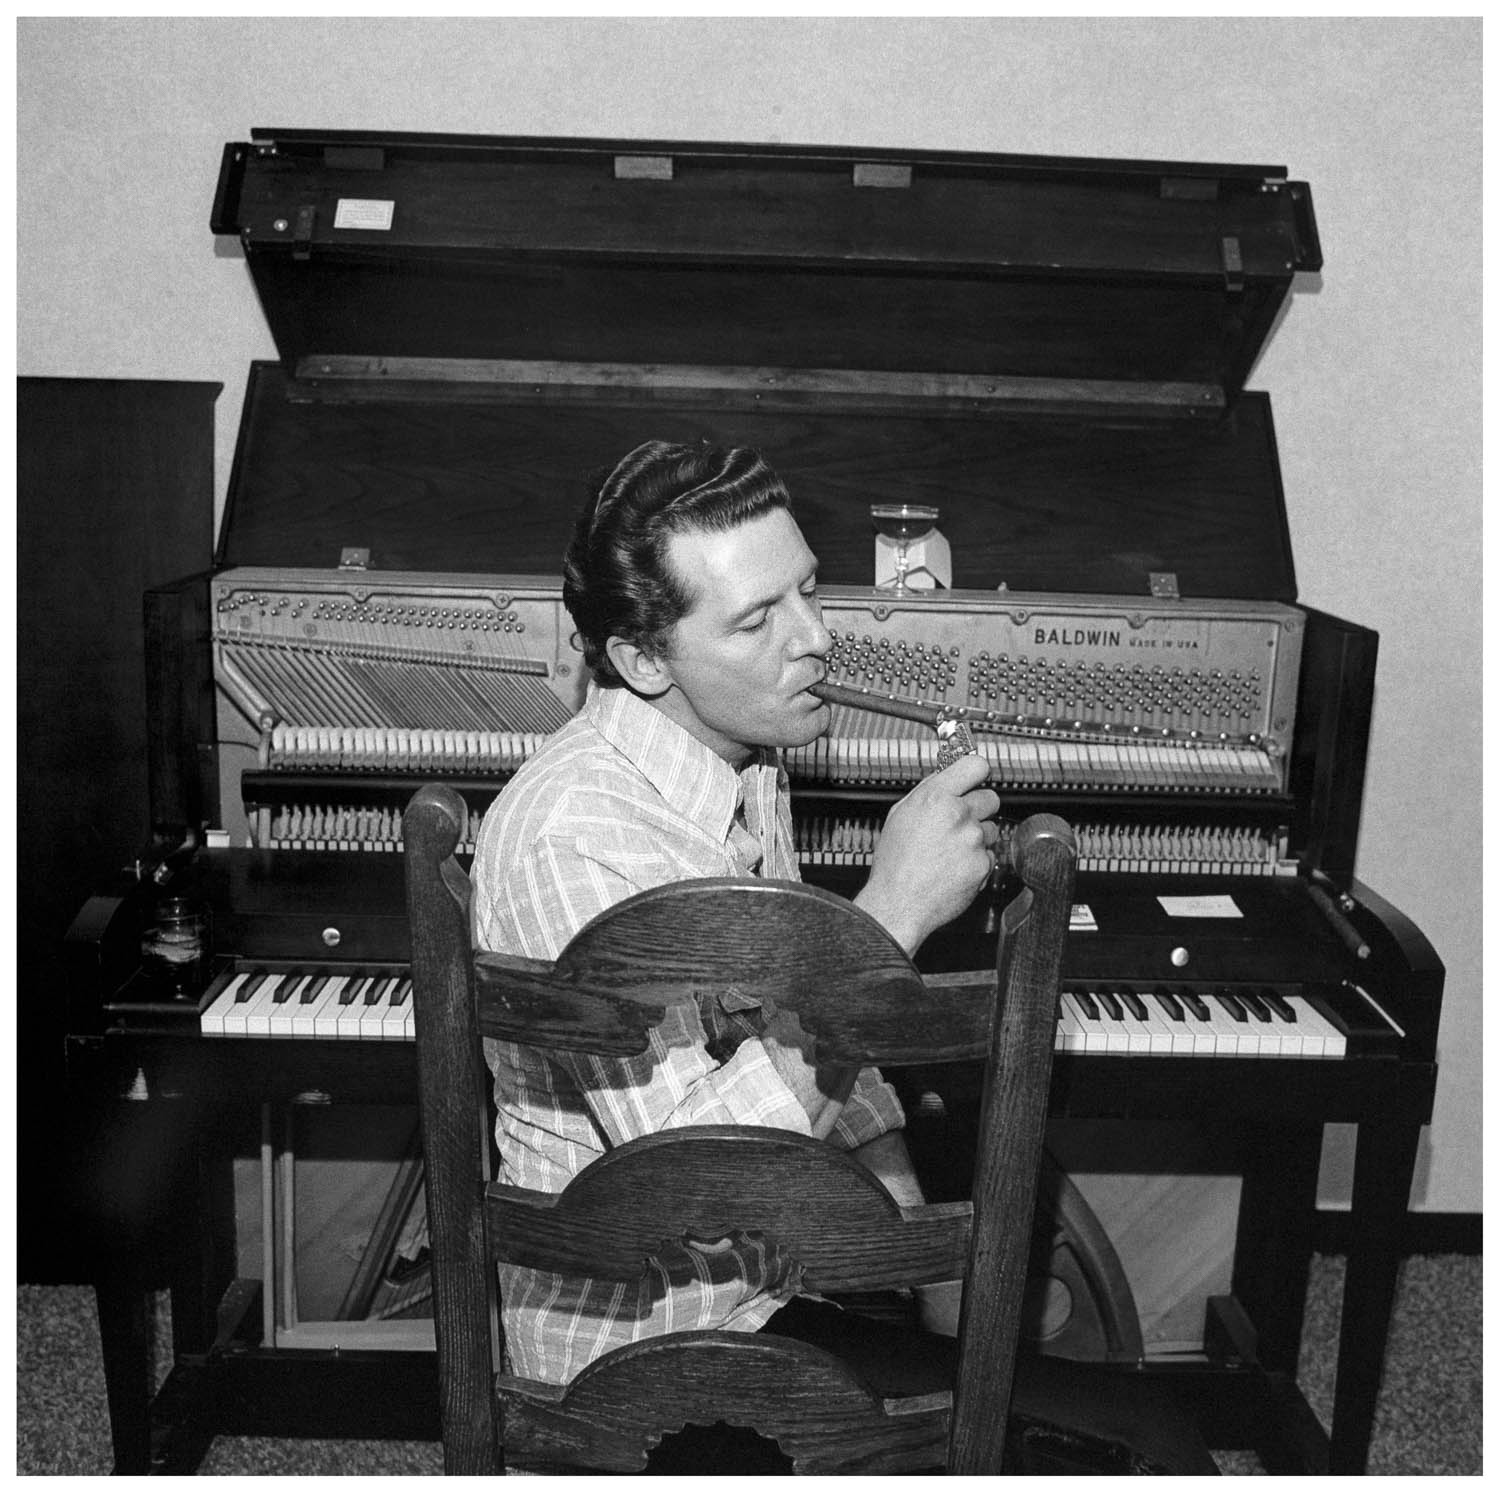 Henry Horenstein_Jerry Lee Lewis, Ramada Inn, Boston, Ma, 1975 from the series _Honky Tonk_ Portraits of Country Music_